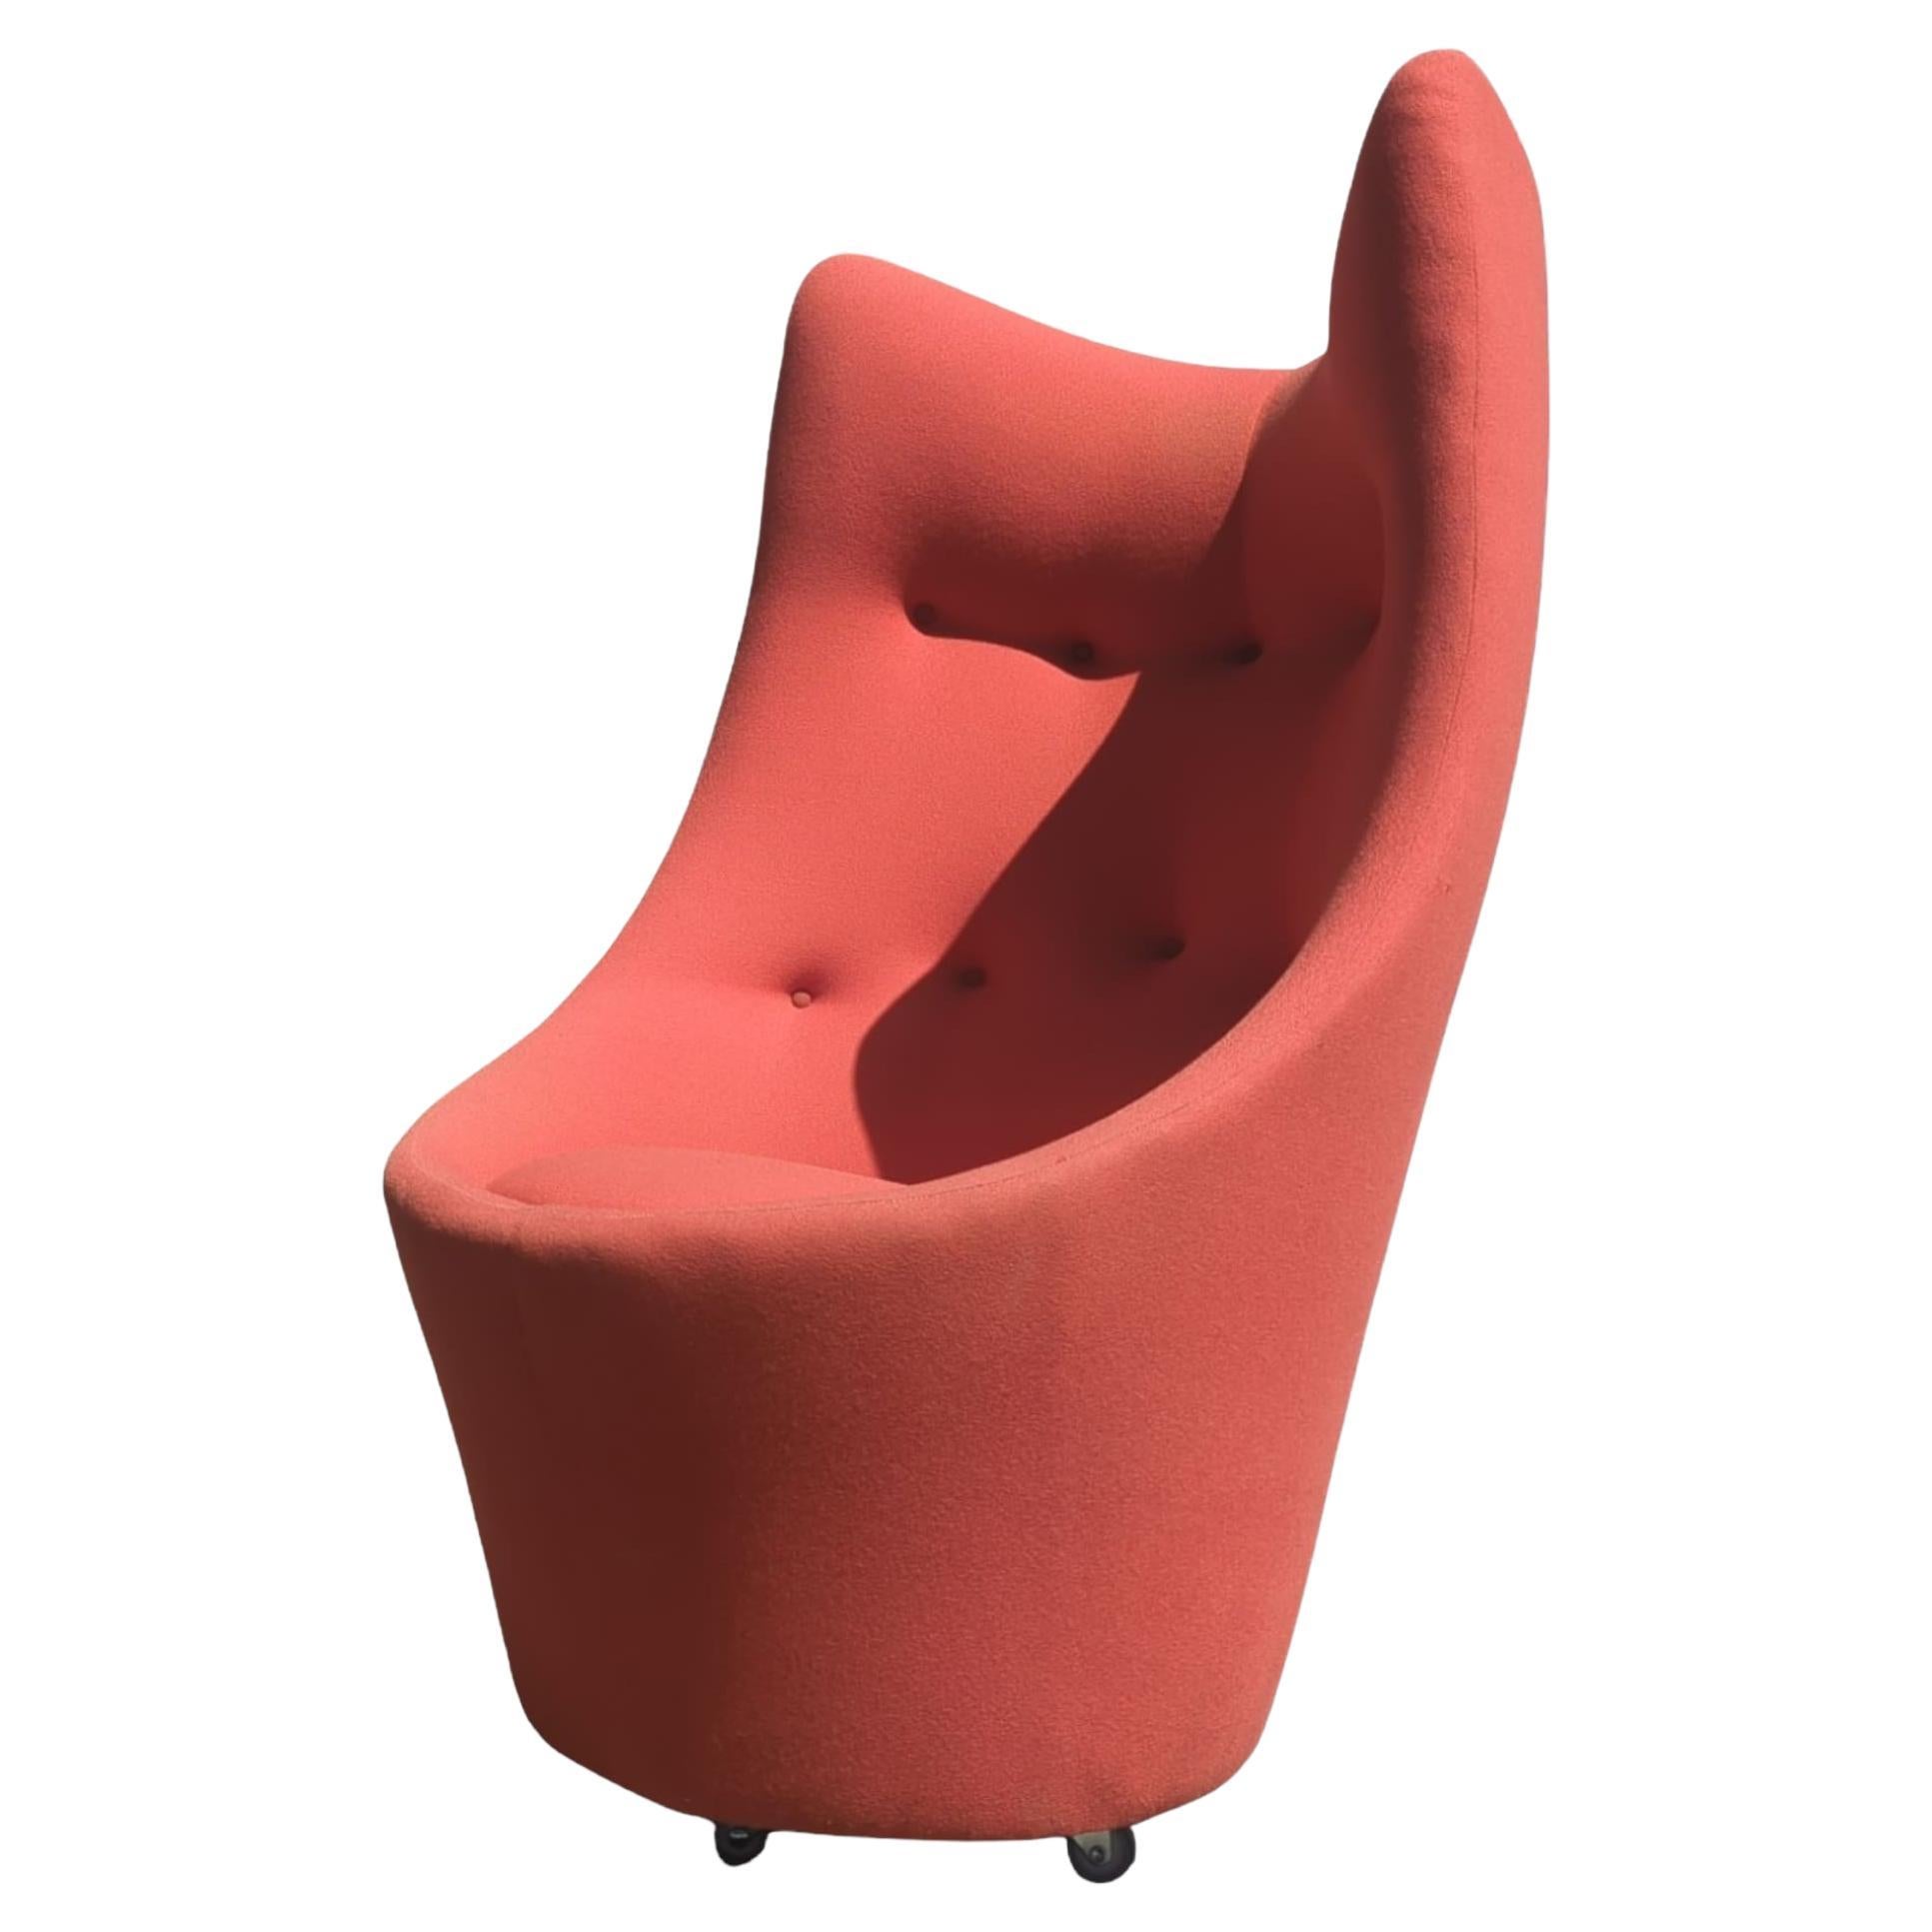 Product Description Title:
Pre -order, currently under restoration - authentic Featherston mach II talking chair

Pics shown is unrestored version, enquire within as pre order if you want it fully restored including working audio and fabric